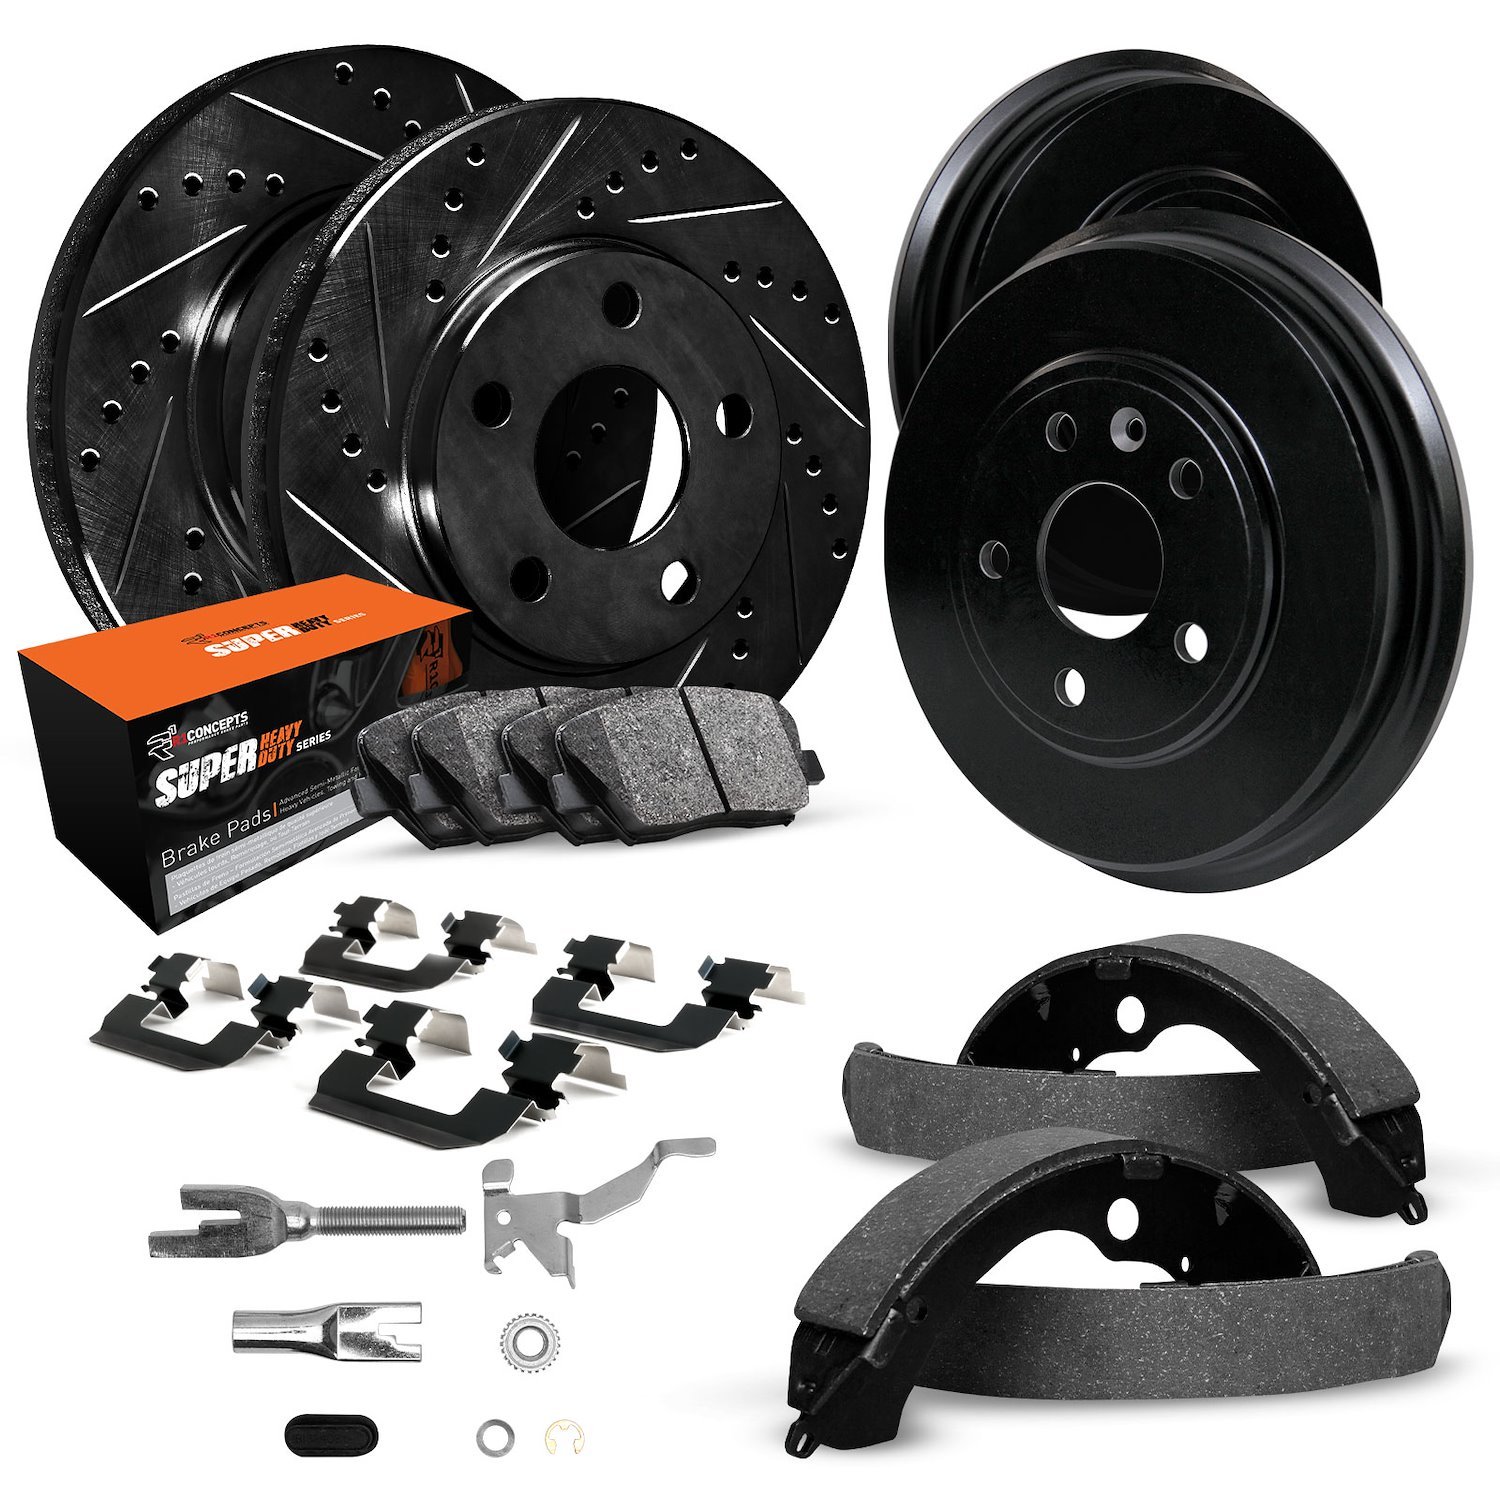 E-Line Drilled/Slotted Black Rotor & Drum Set w/Super-Duty Pads, Shoes, Hardware/Adjusters, 1995-2000 GM